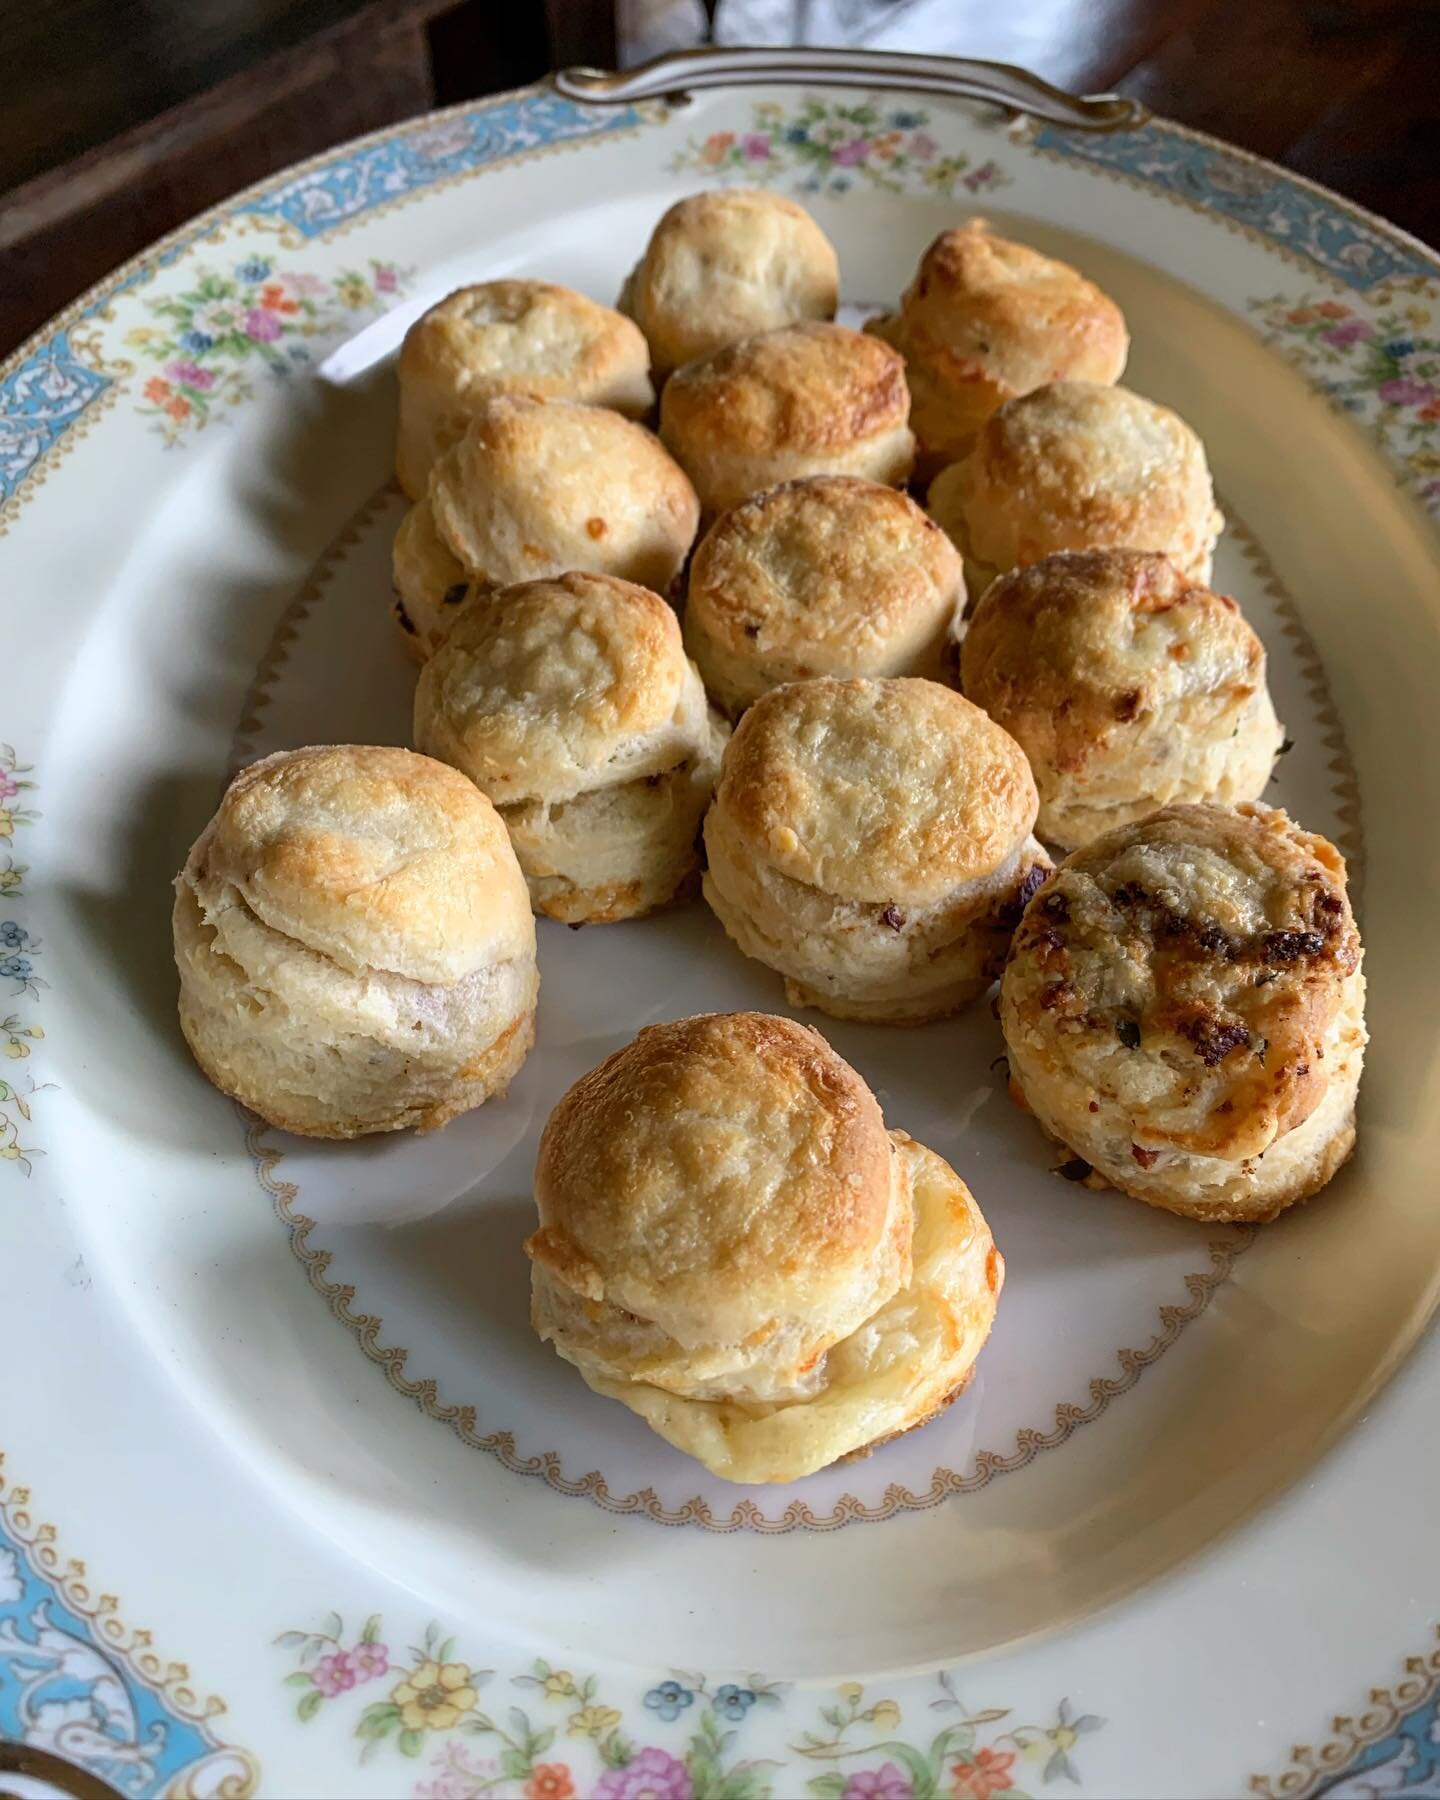 Happy Sunday everyone...who&rsquo;s having biscuits this morning? These are crazy-good, bacon-cheddar beauties @thebarnnc